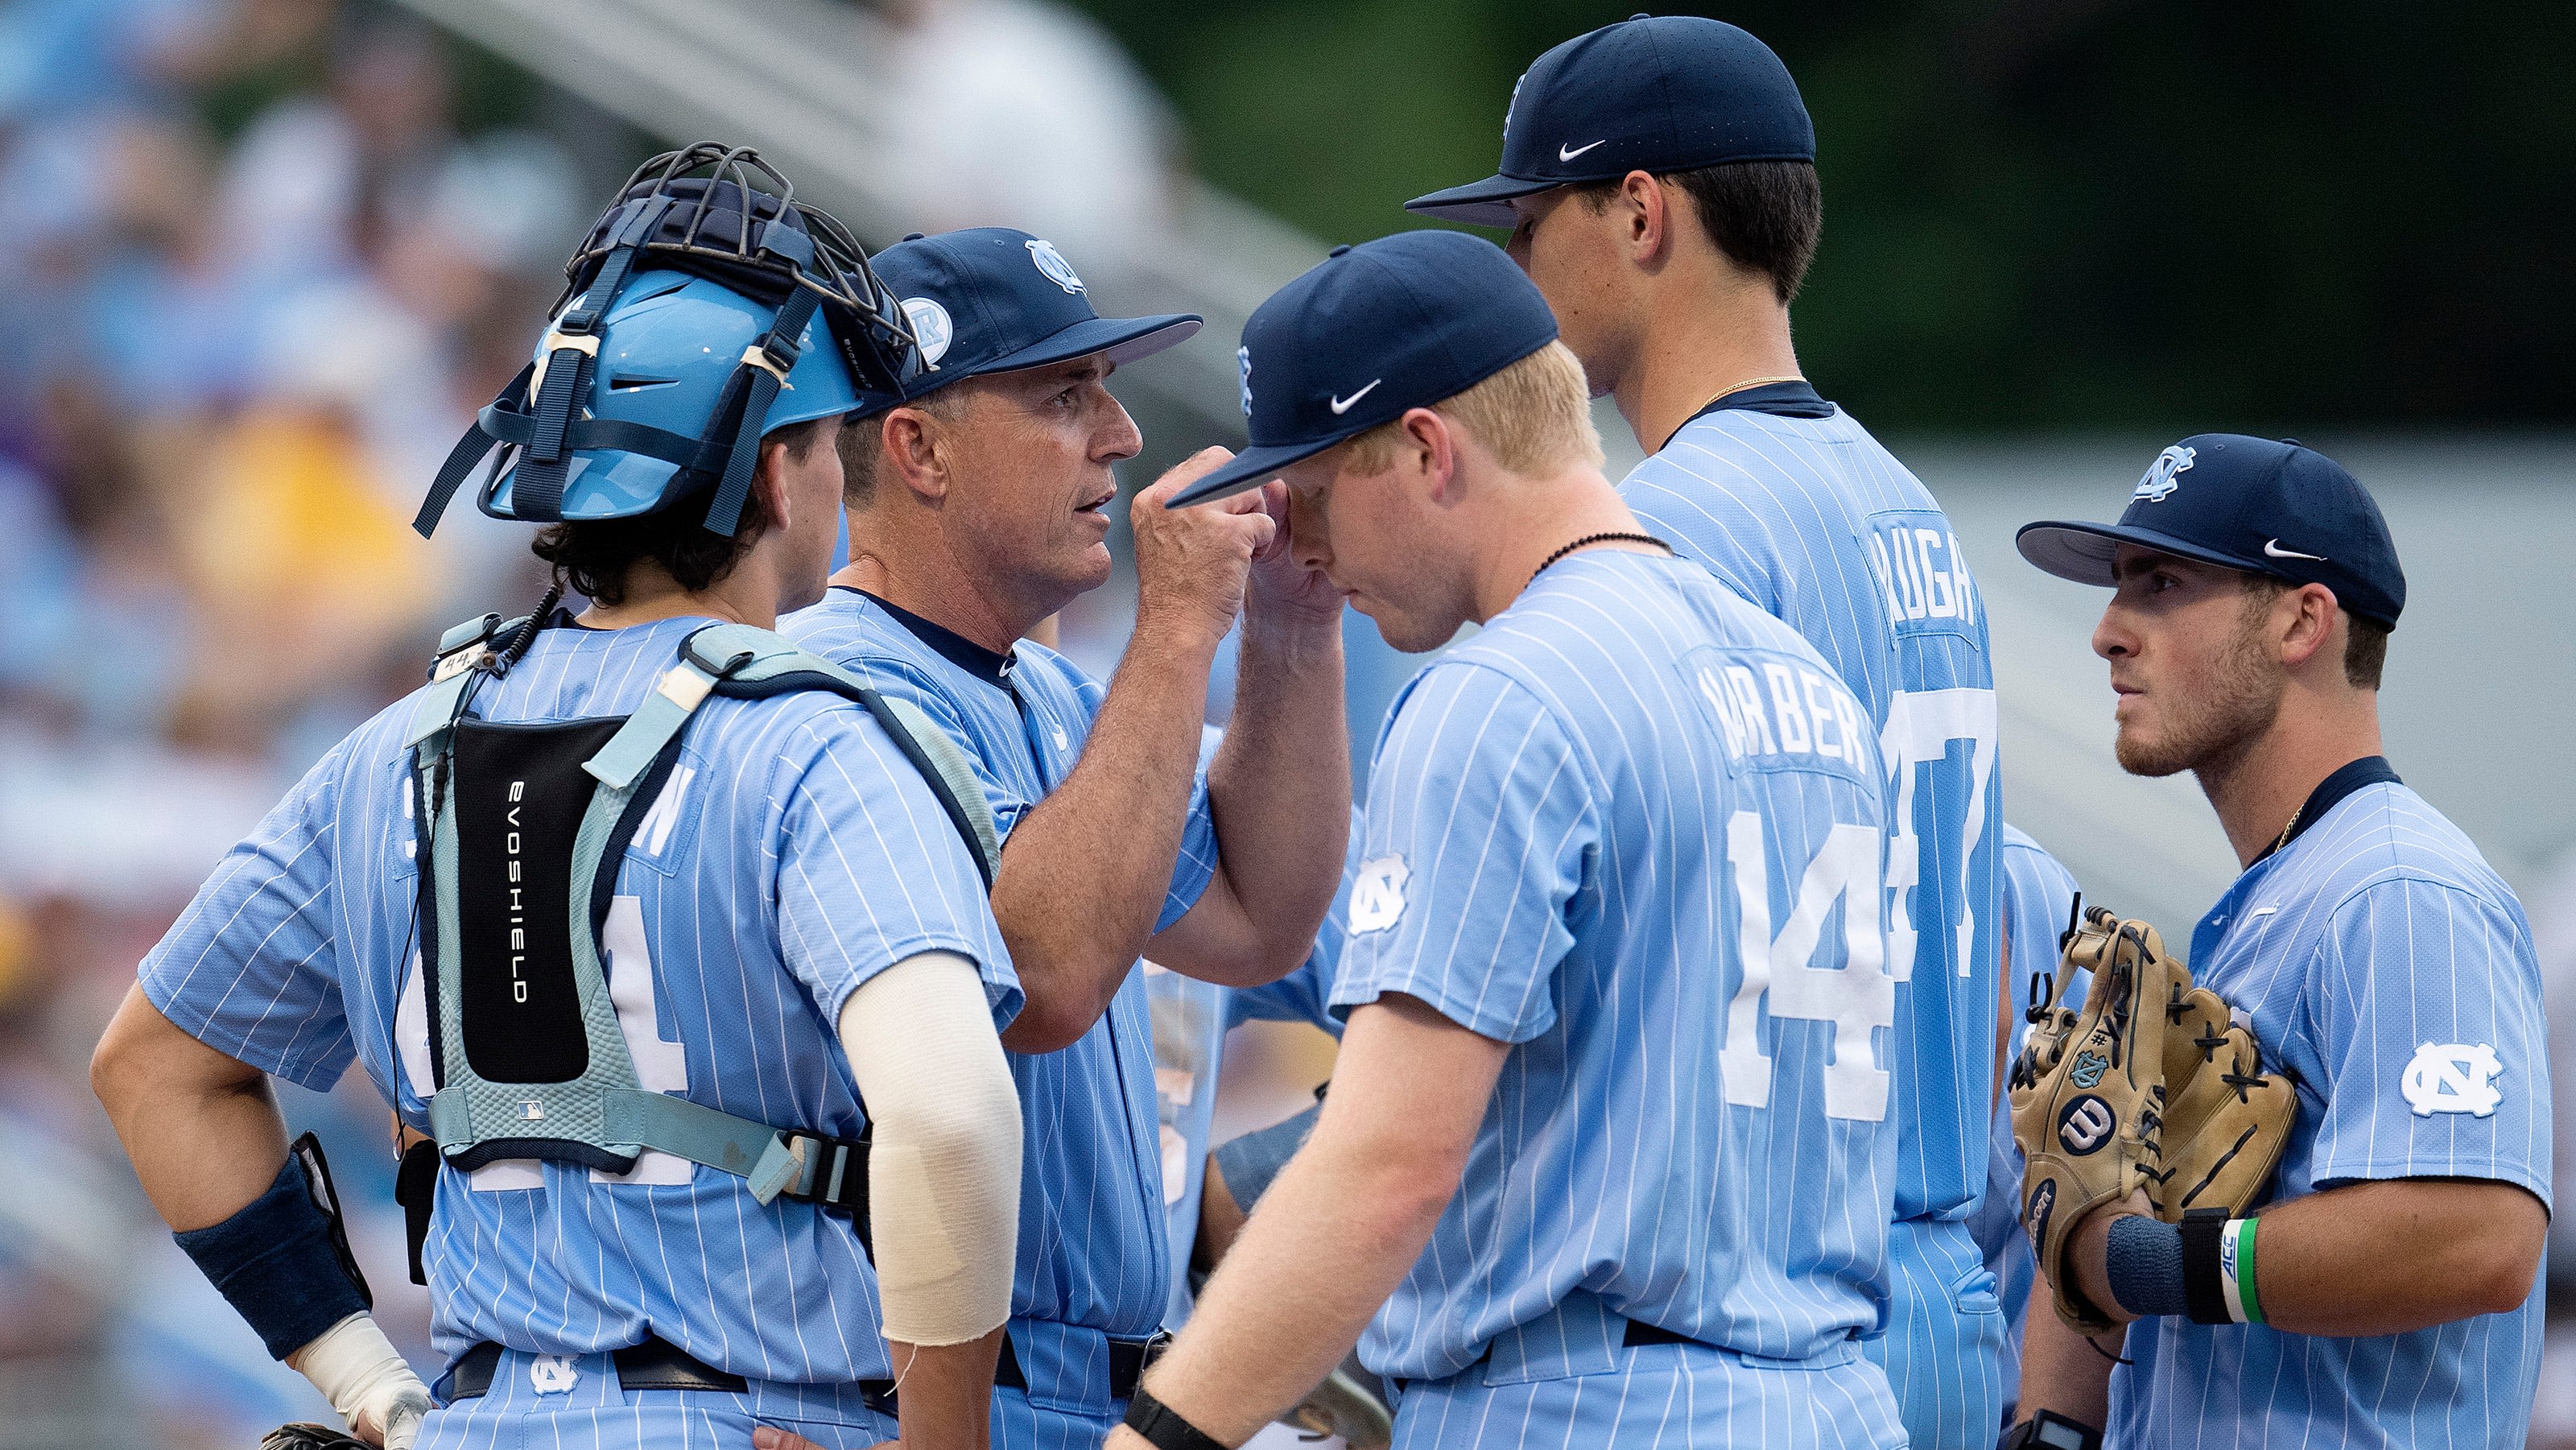 What channel is UNC baseball vs LSU on today? NCAA Tournament time, TV, streaming